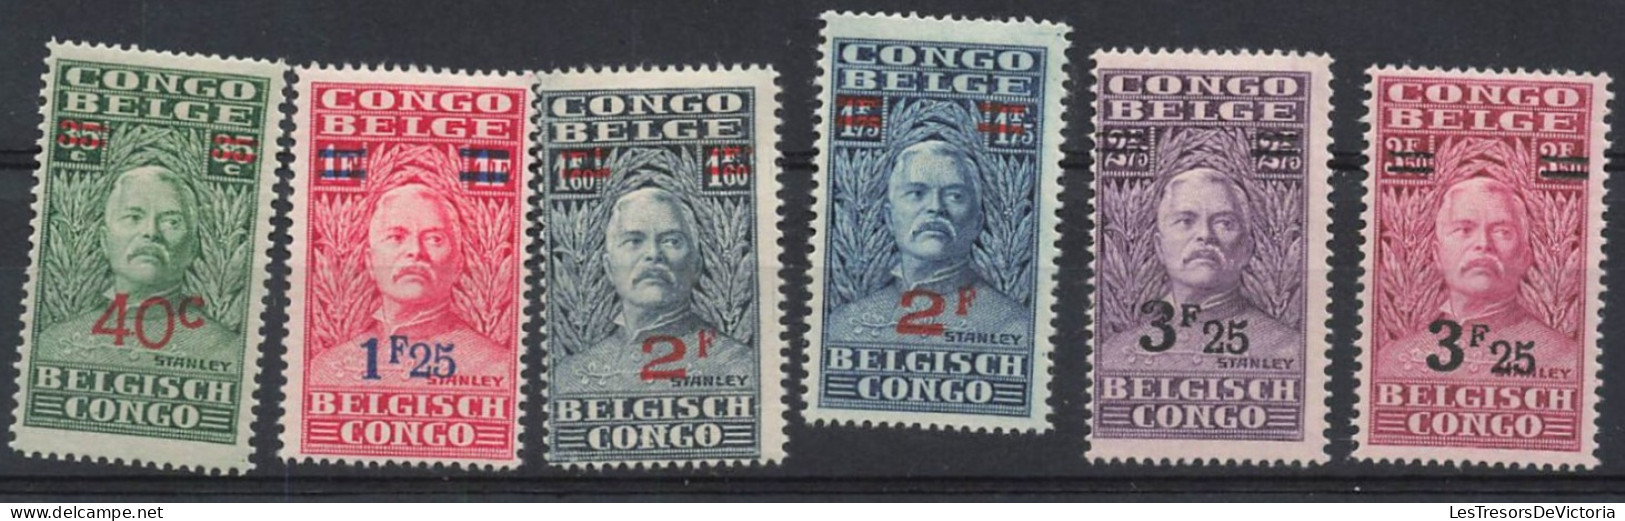 Congo Belge - 1931 - COB 162/67* - Timbres " Starley" Avec Surcharges - Cote 18 - Neufs